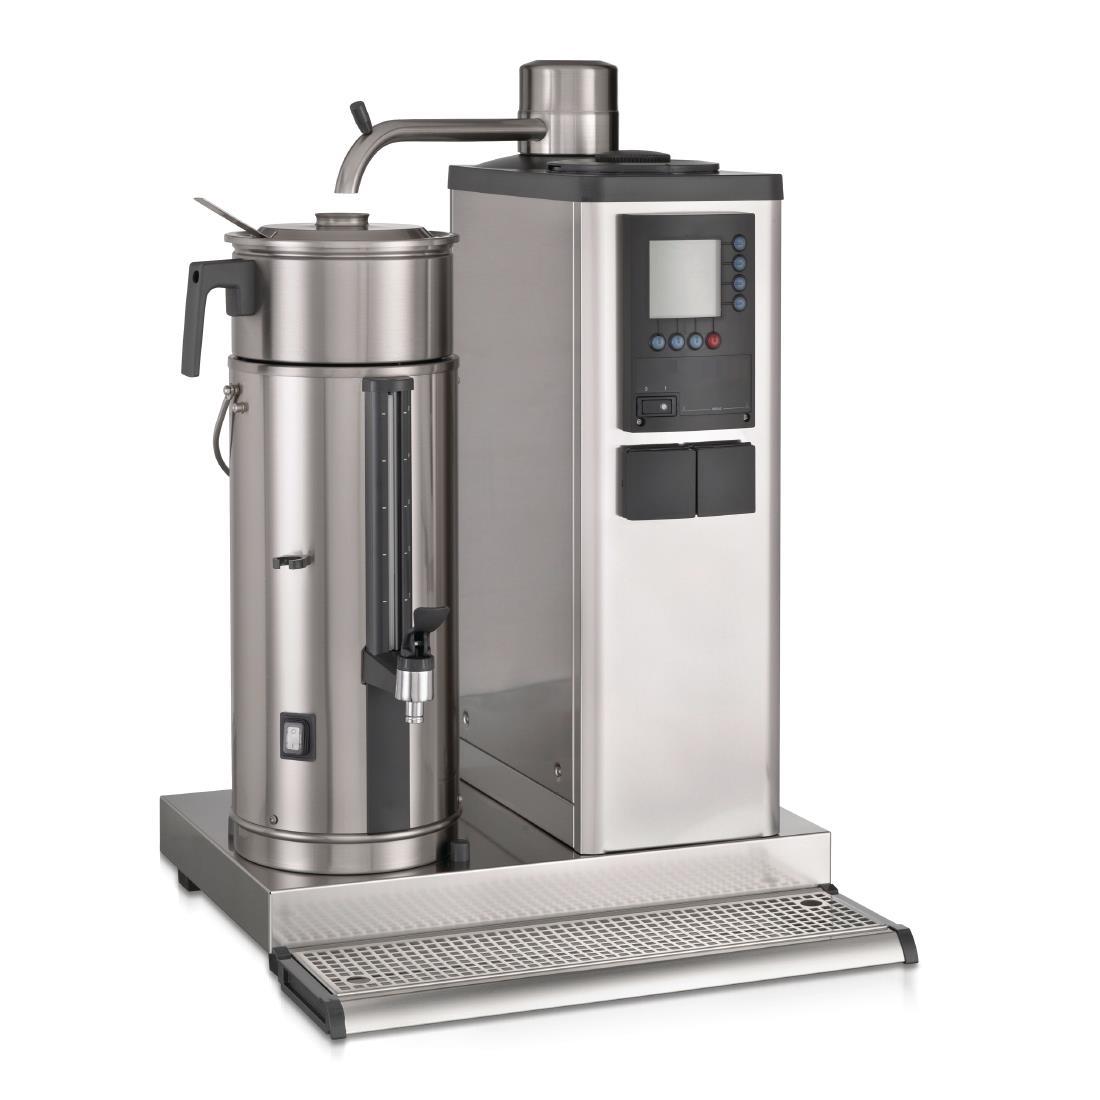 Bravilor B5 L Bulk Coffee Brewer with 5Ltr Coffee Urn Single Phase - DC673-1P  - 1